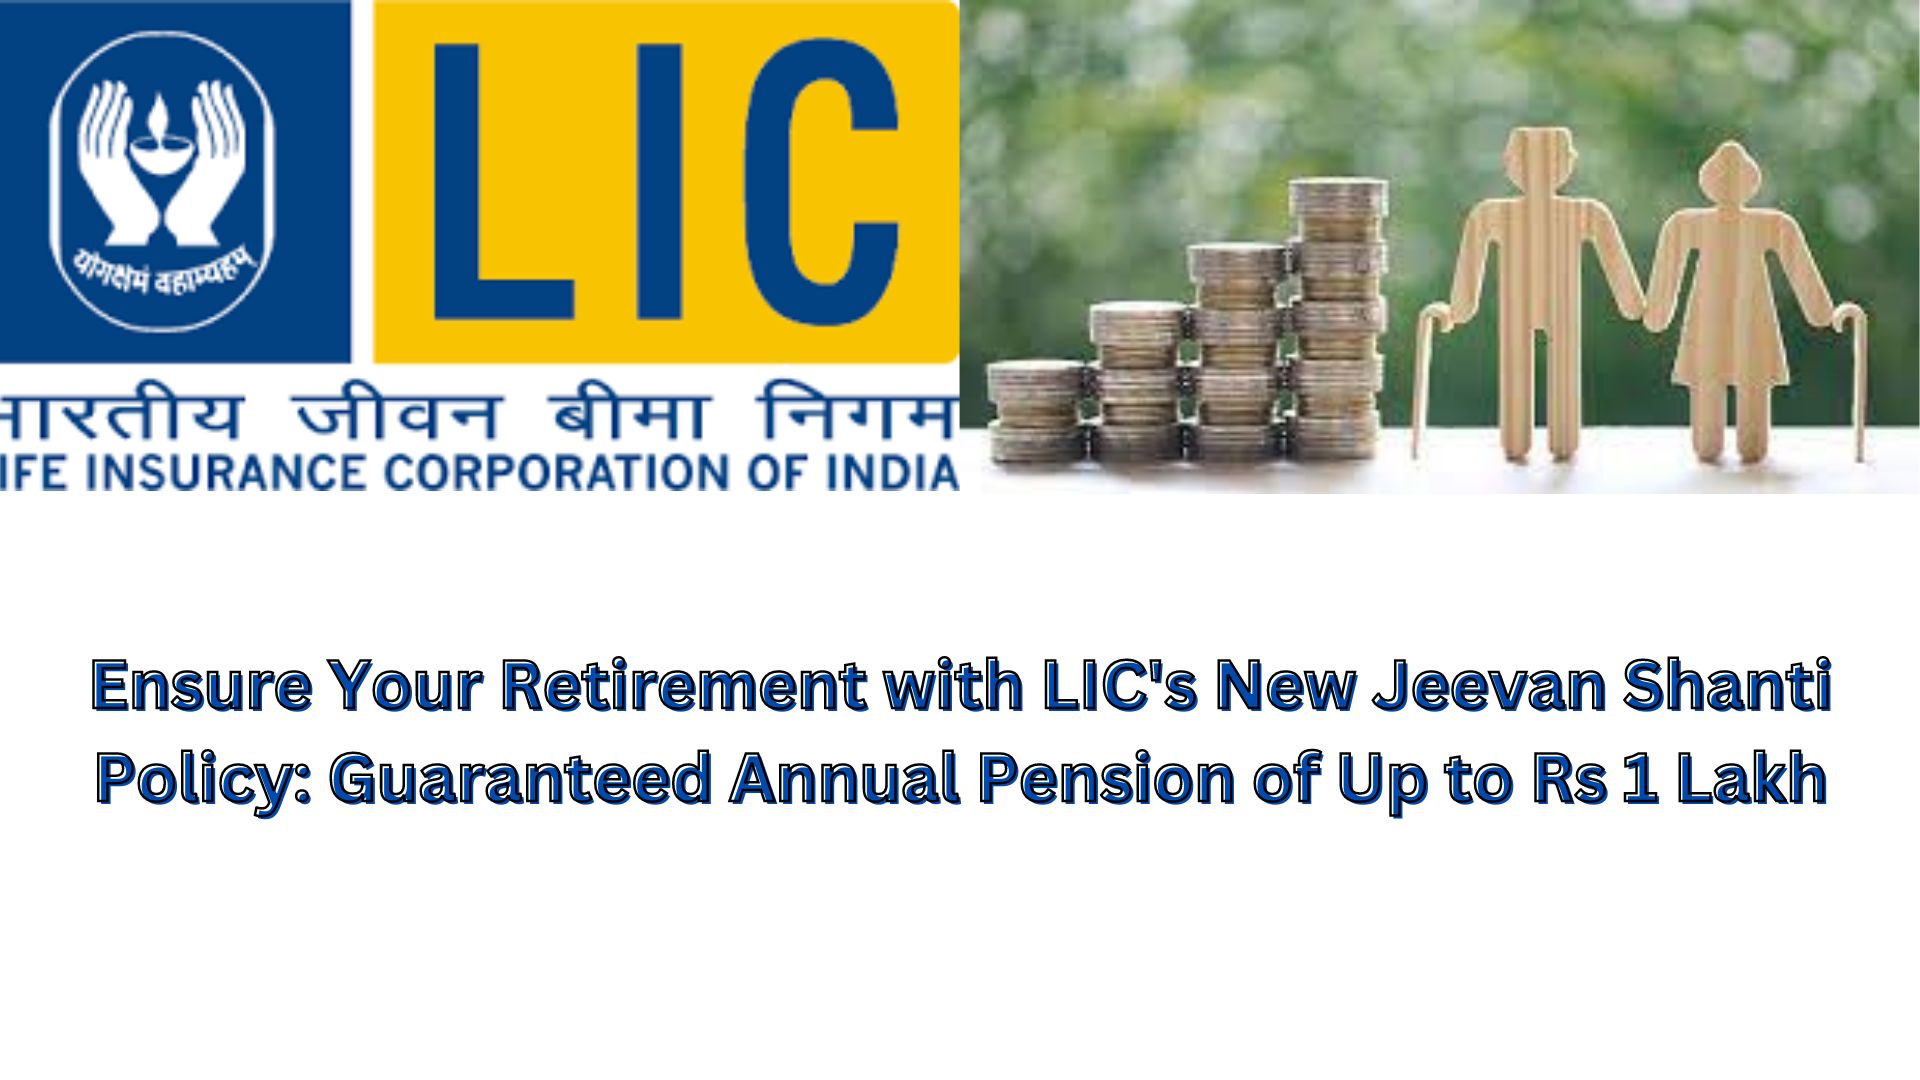 Ensure Your Retirement with LIC's New Jeevan Shanti Policy: Guaranteed Annual Pension of Up to Rs 1 Lakh